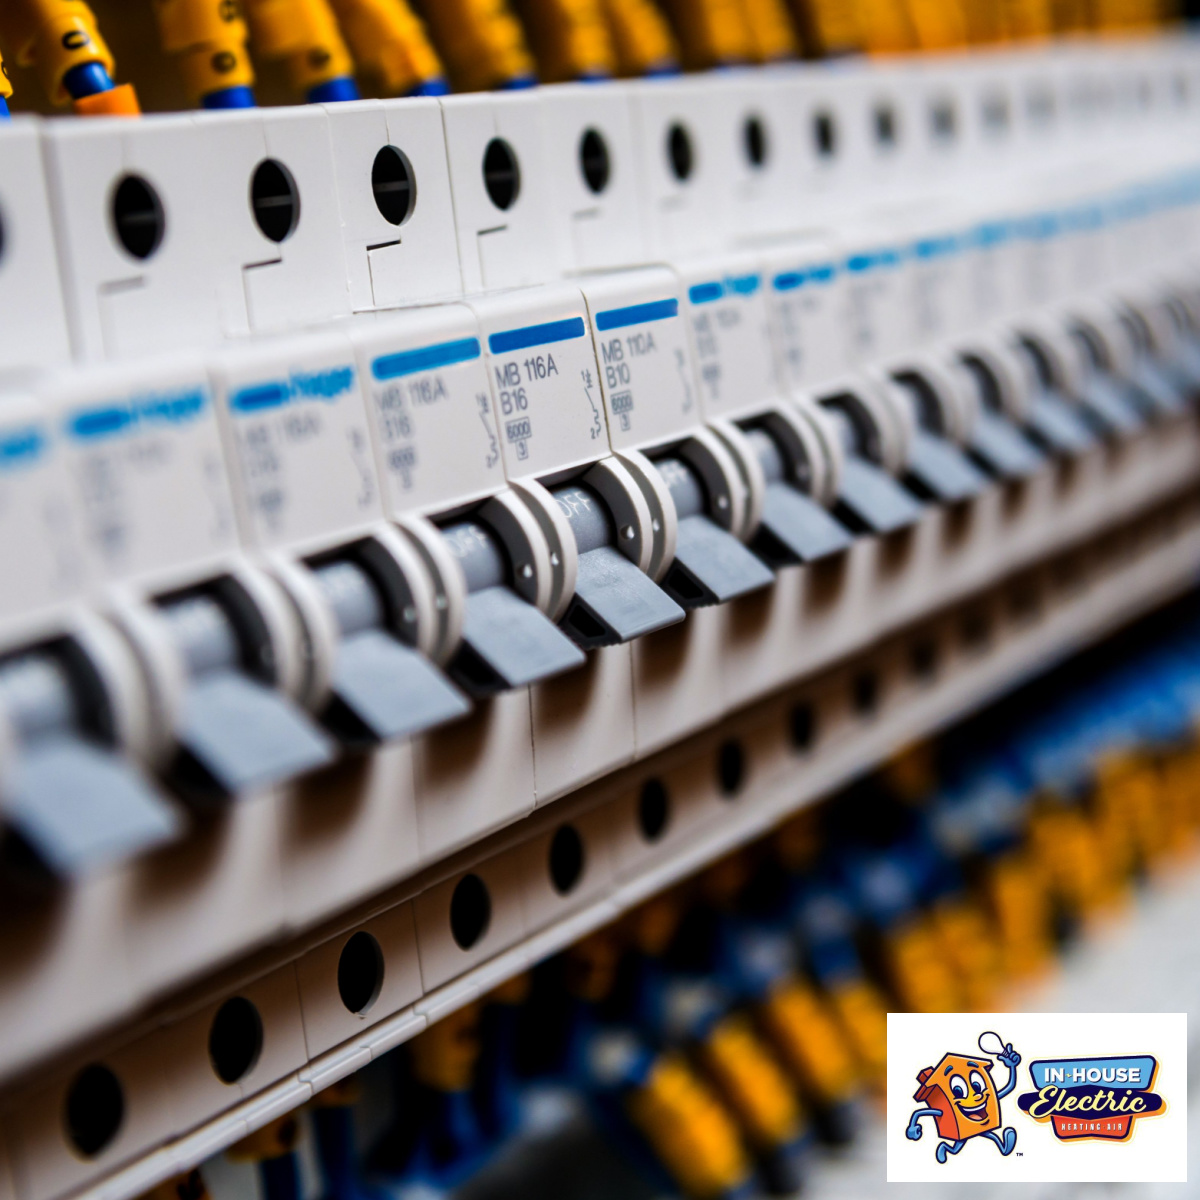 The Importance of Electrical Panel Installation, Upgrades and Replacements and How In-House Electric Can Help